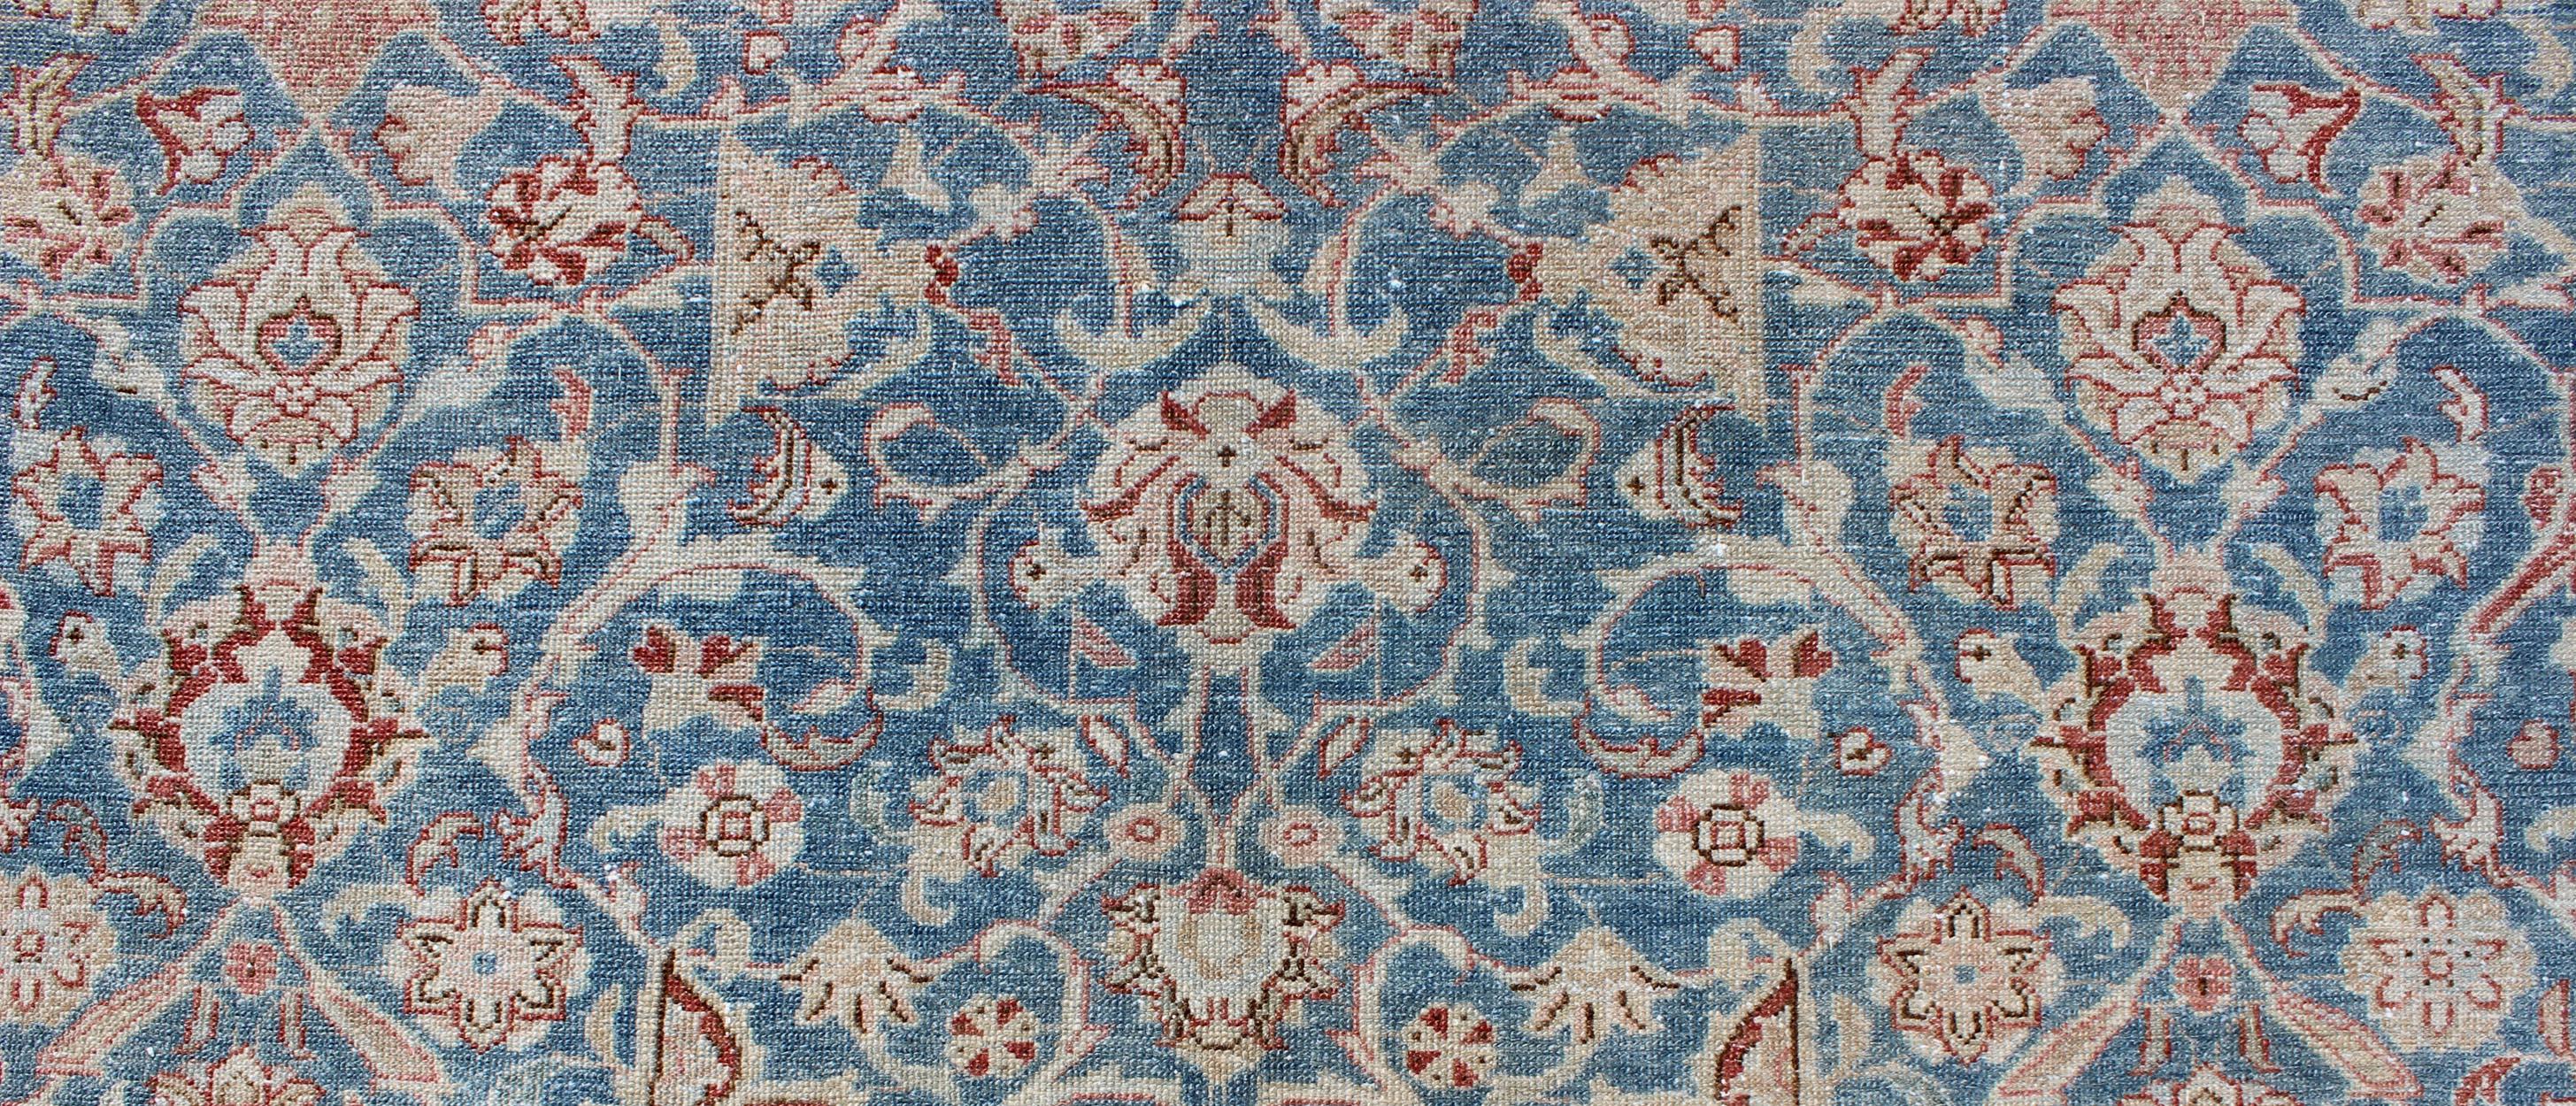 Blue and Red Antique Persian Malayer Rug with All-Over Design and Ornate Borders For Sale 2